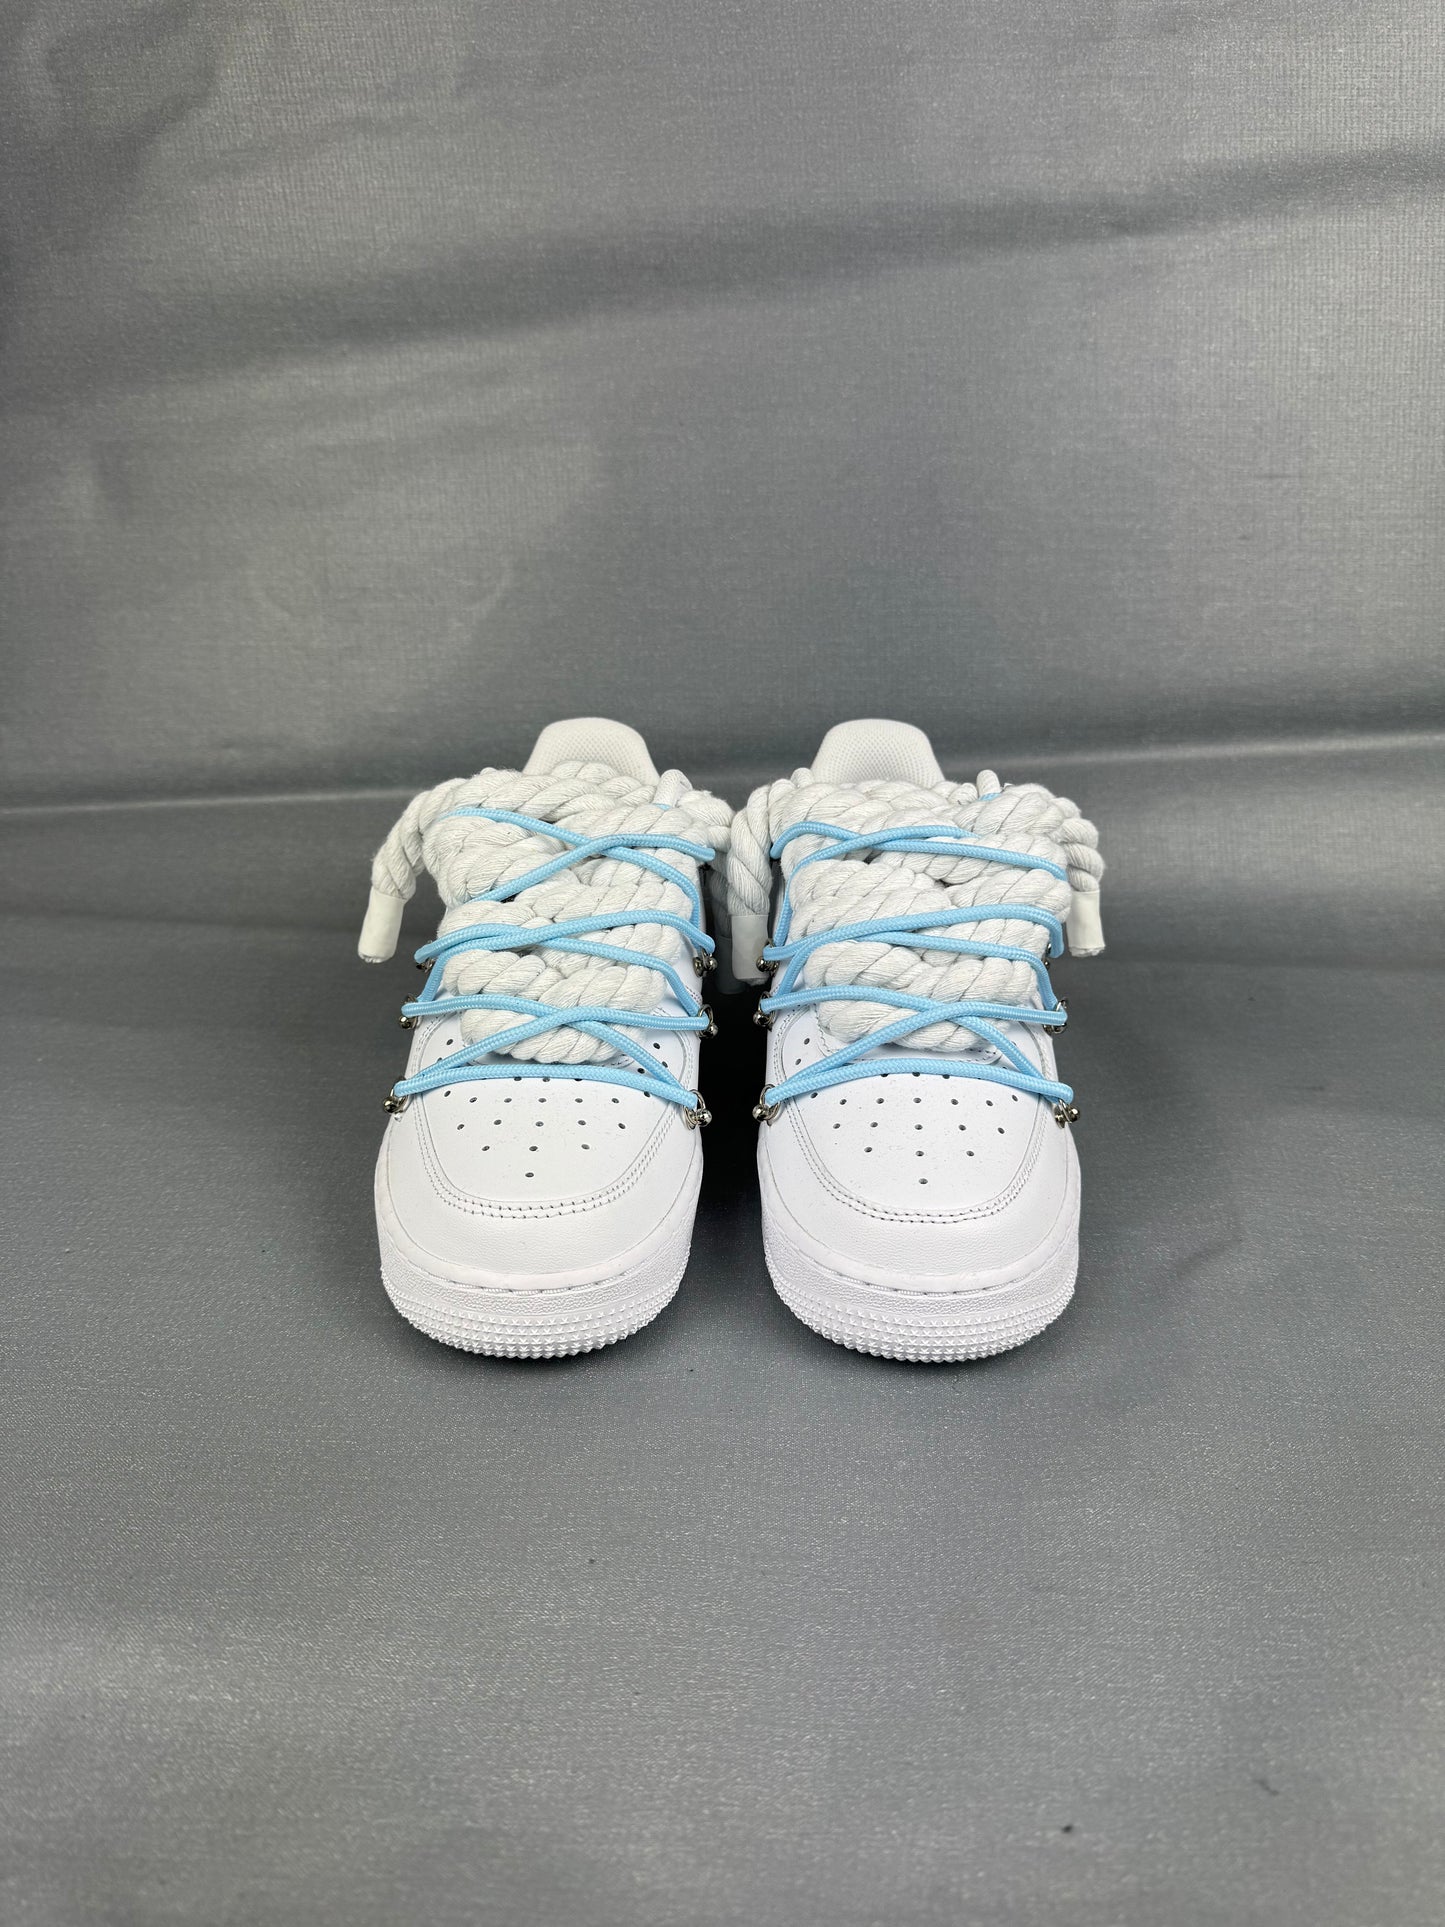 AF1 White | Spesh Laces baby Blue